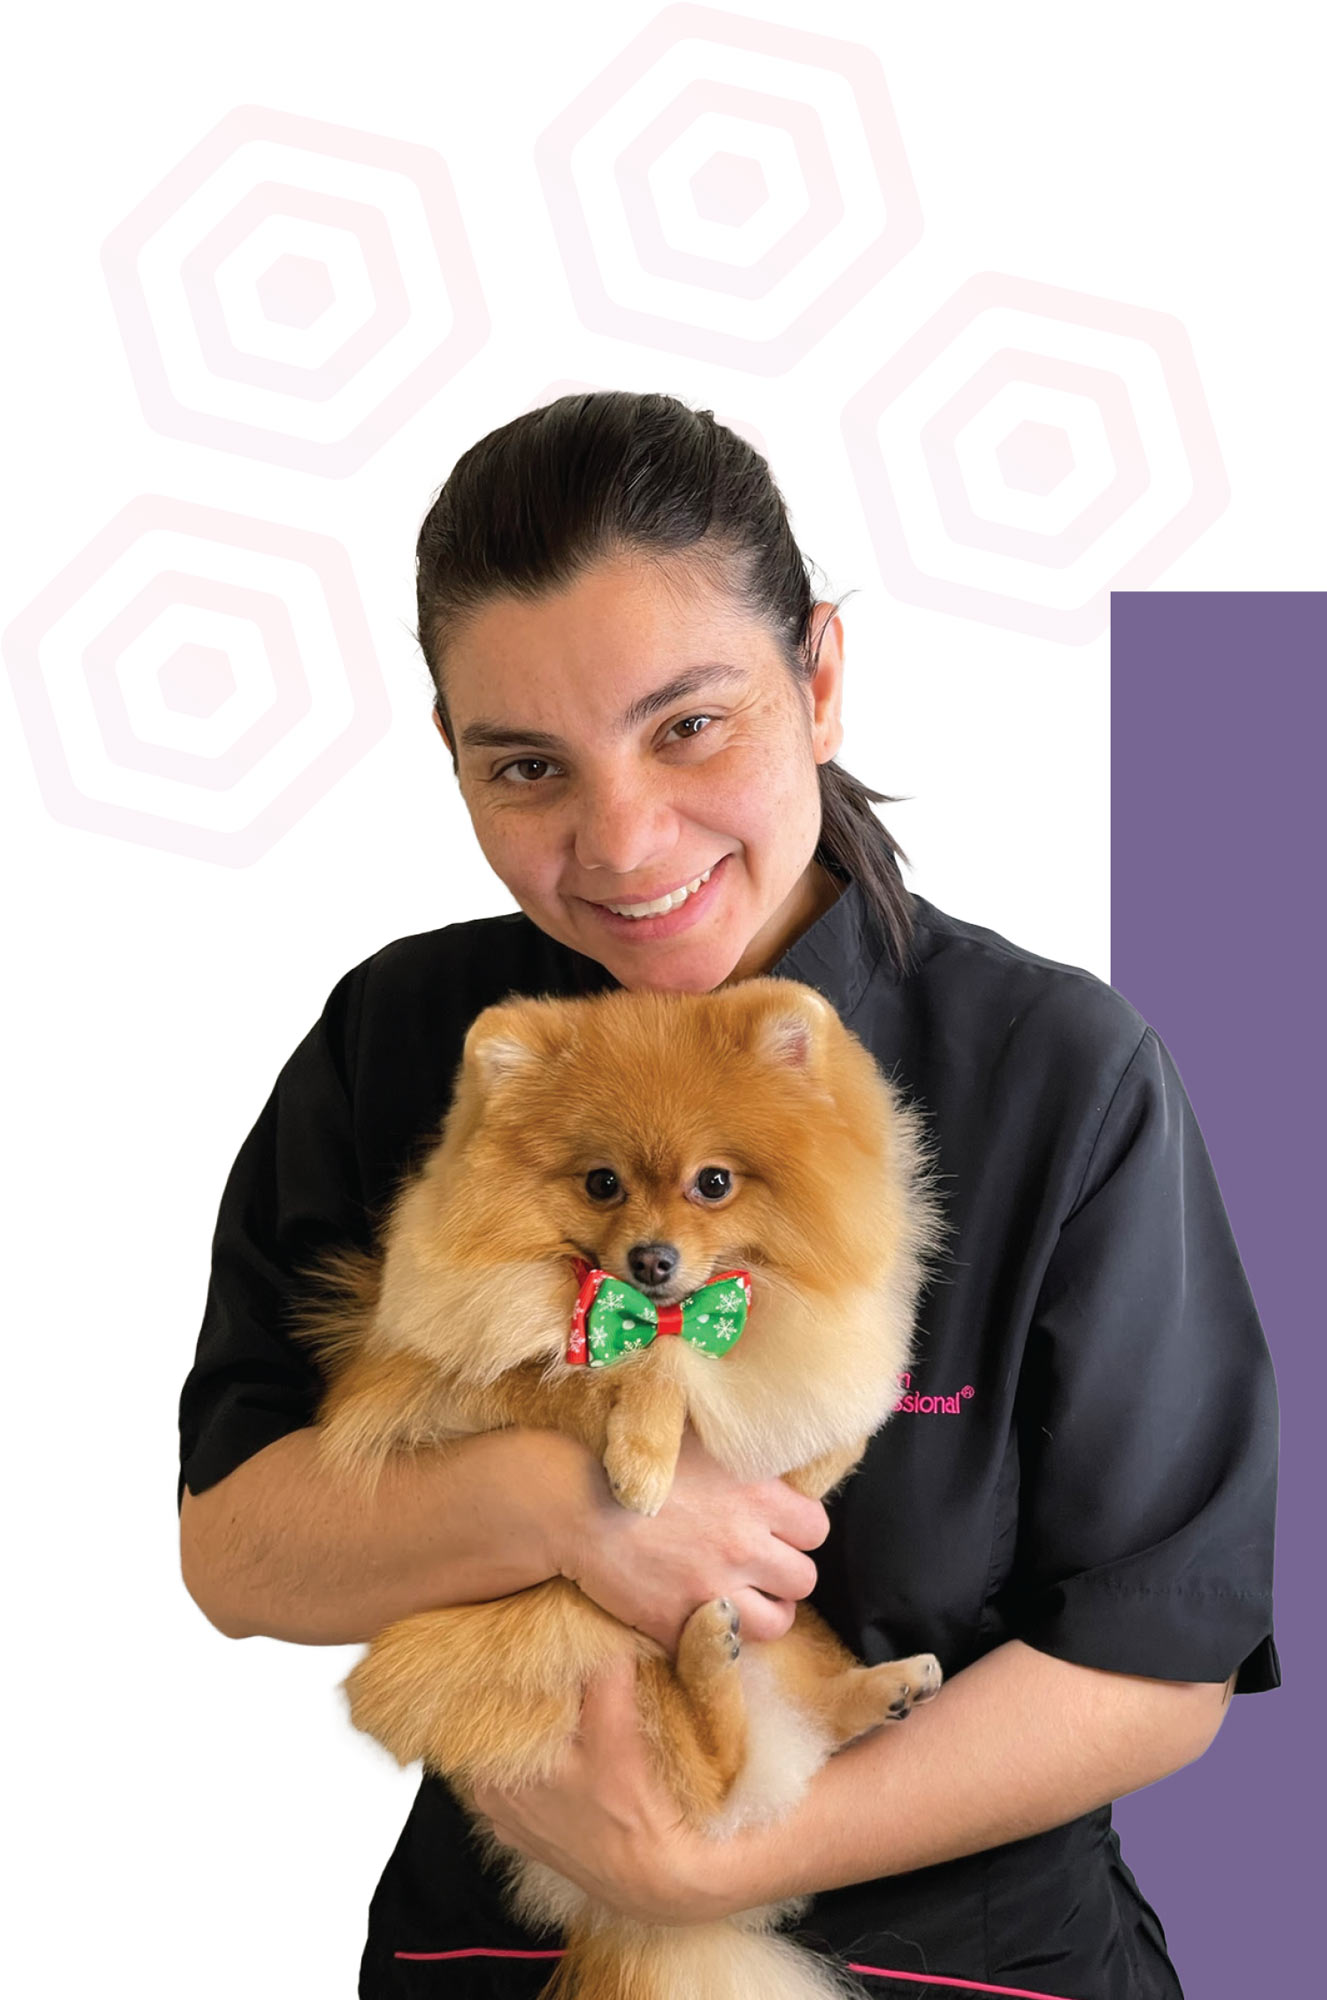 Diana Paiva smiles holding a Pomeranian wearing a bowtie